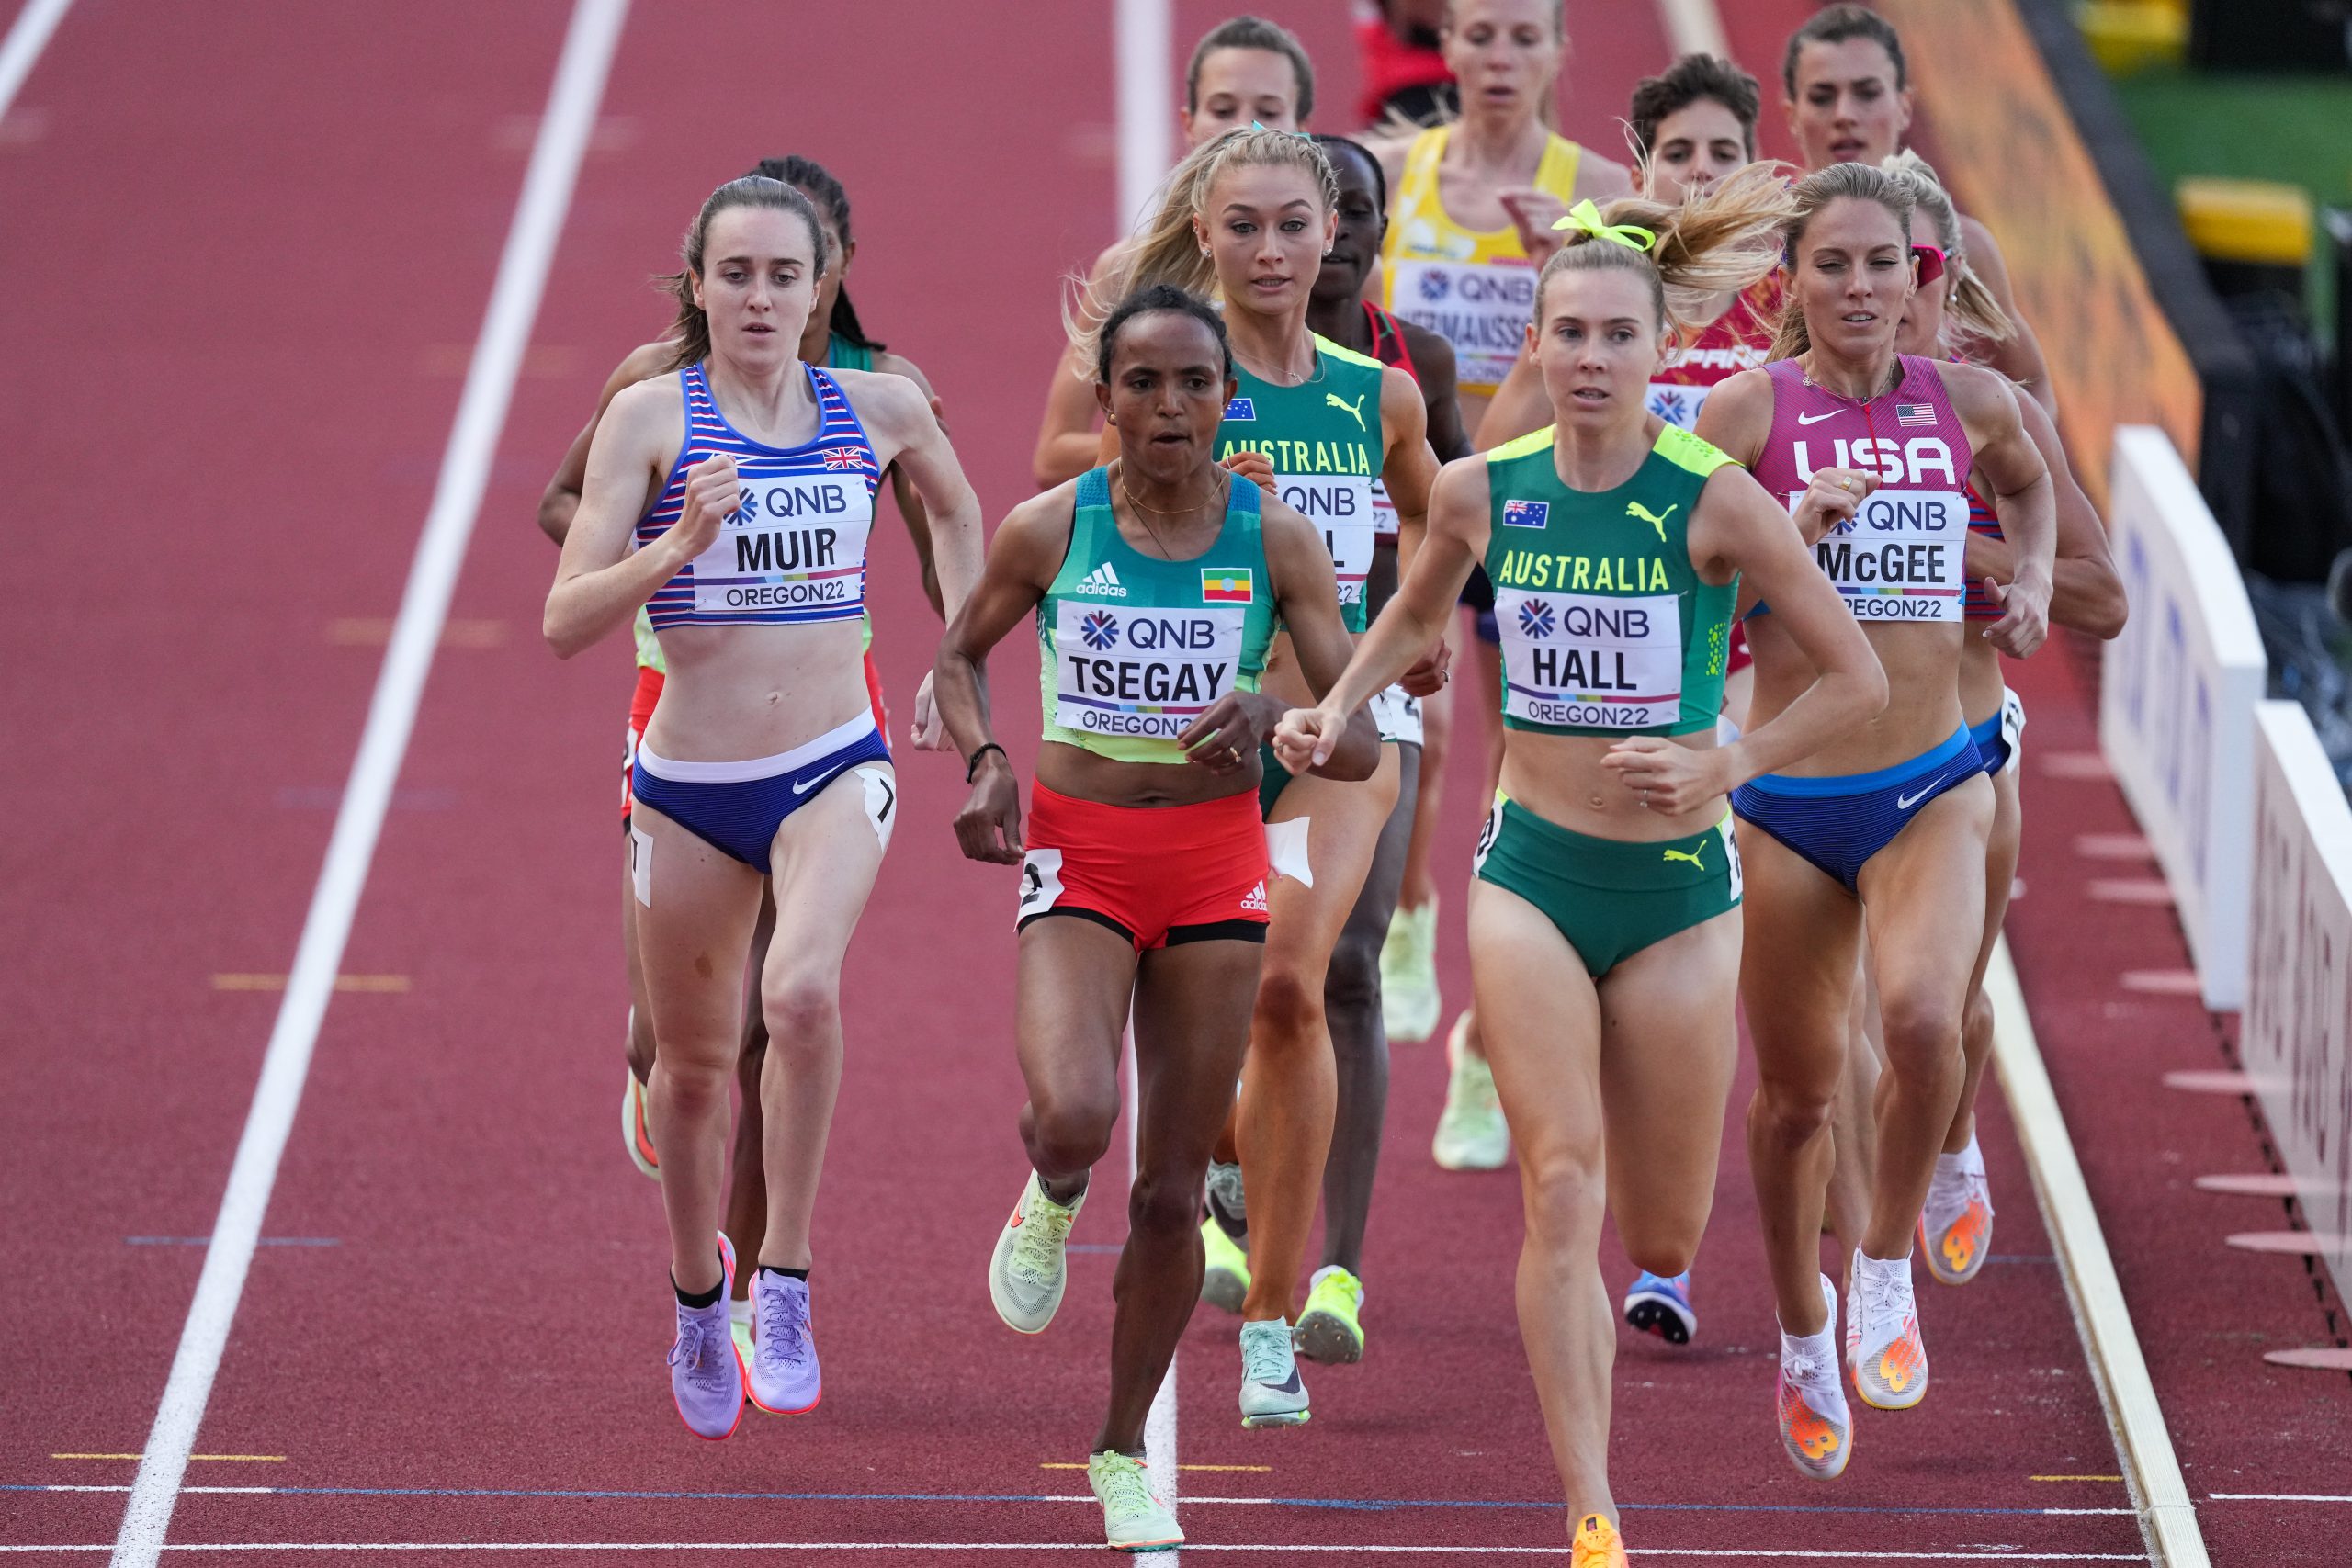 Laura Muir believes rivals fear her in 1500m World Championship final